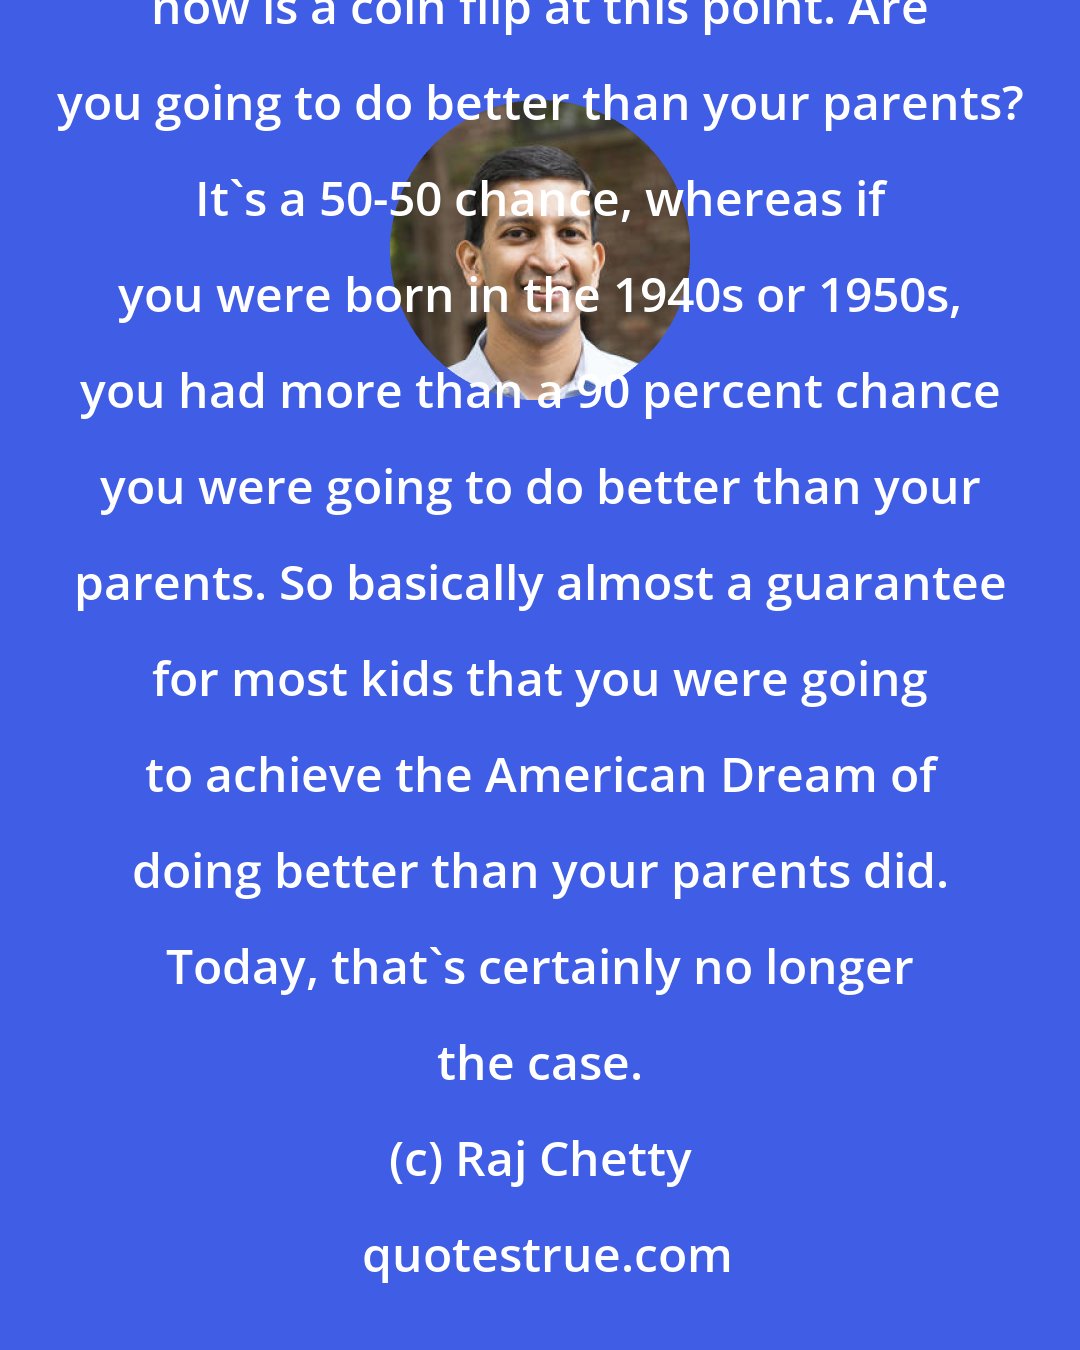 Raj Chetty: I would say basically the commonplace observation that kids aren't going to earn as much as their parents is now is a coin flip at this point. Are you going to do better than your parents? It's a 50-50 chance, whereas if you were born in the 1940s or 1950s, you had more than a 90 percent chance you were going to do better than your parents. So basically almost a guarantee for most kids that you were going to achieve the American Dream of doing better than your parents did. Today, that's certainly no longer the case.